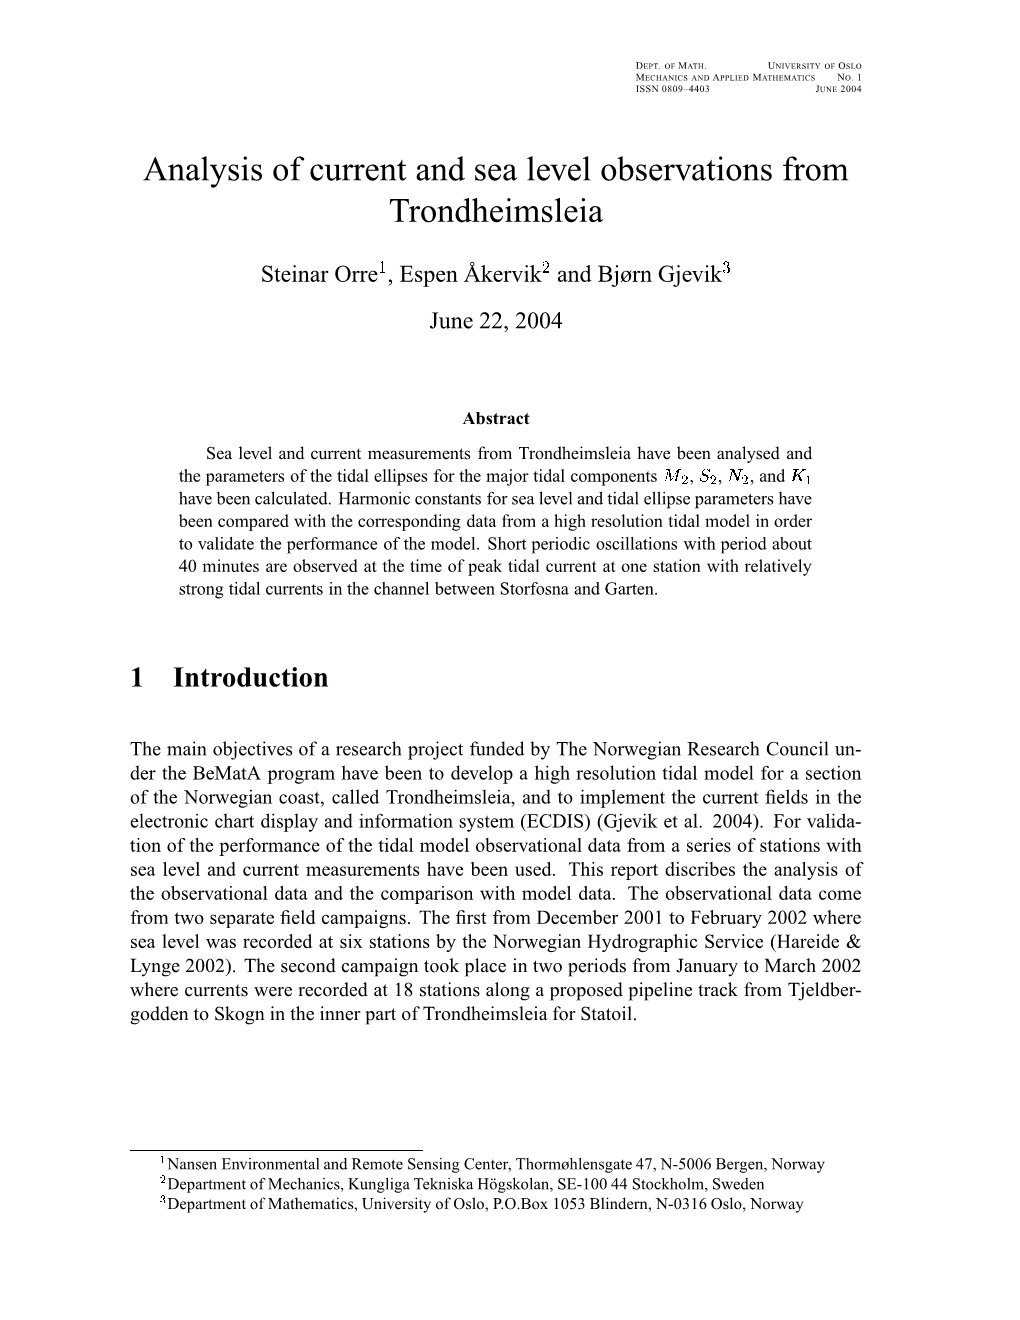 Analysis of Current and Sea Level Observations from Trondheimsleia